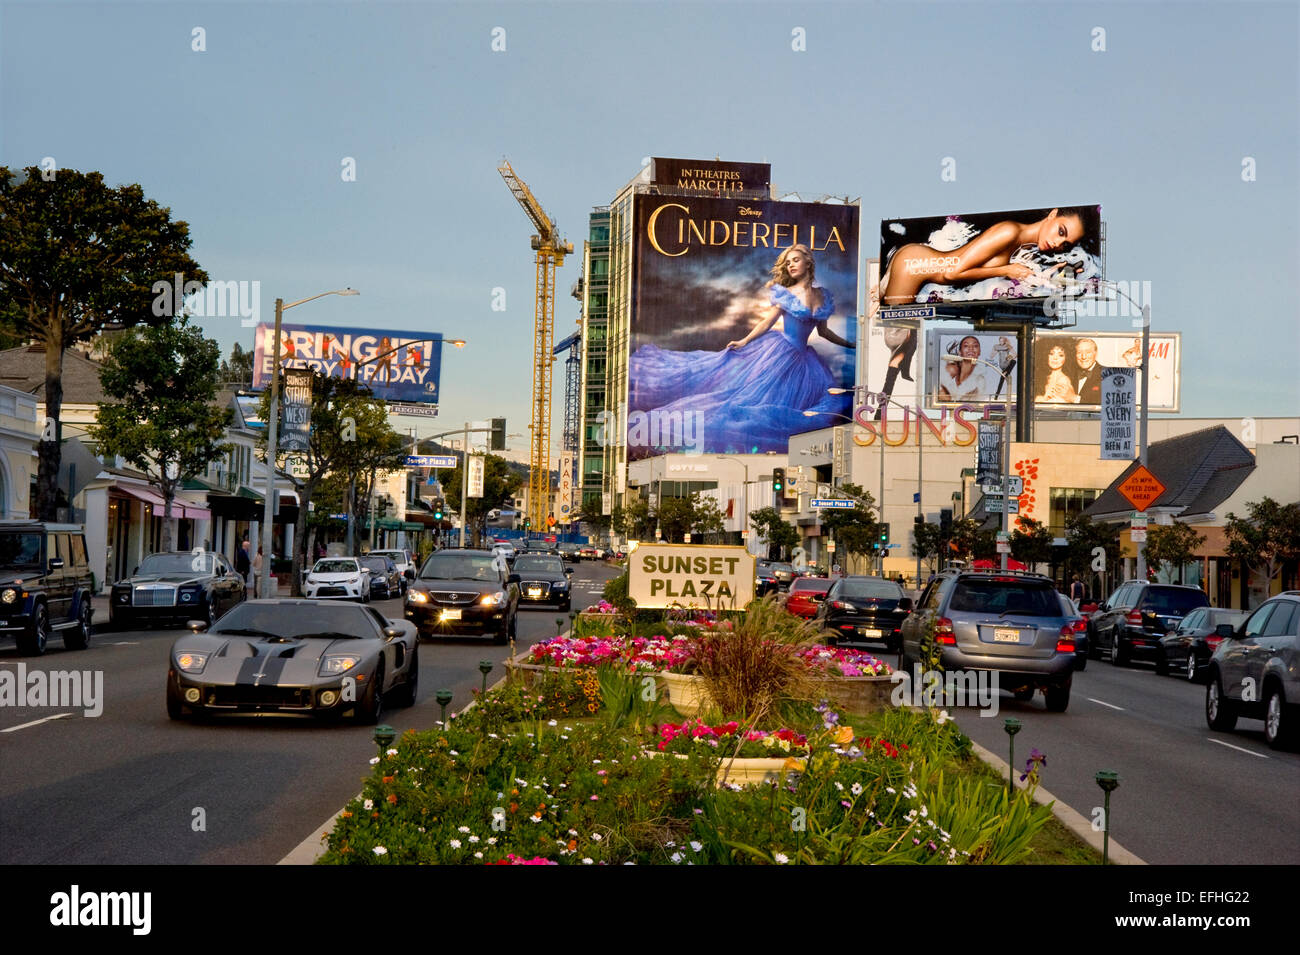 Sunset Plaza area of the Sunset Strip in West Hollywood Stock Photo